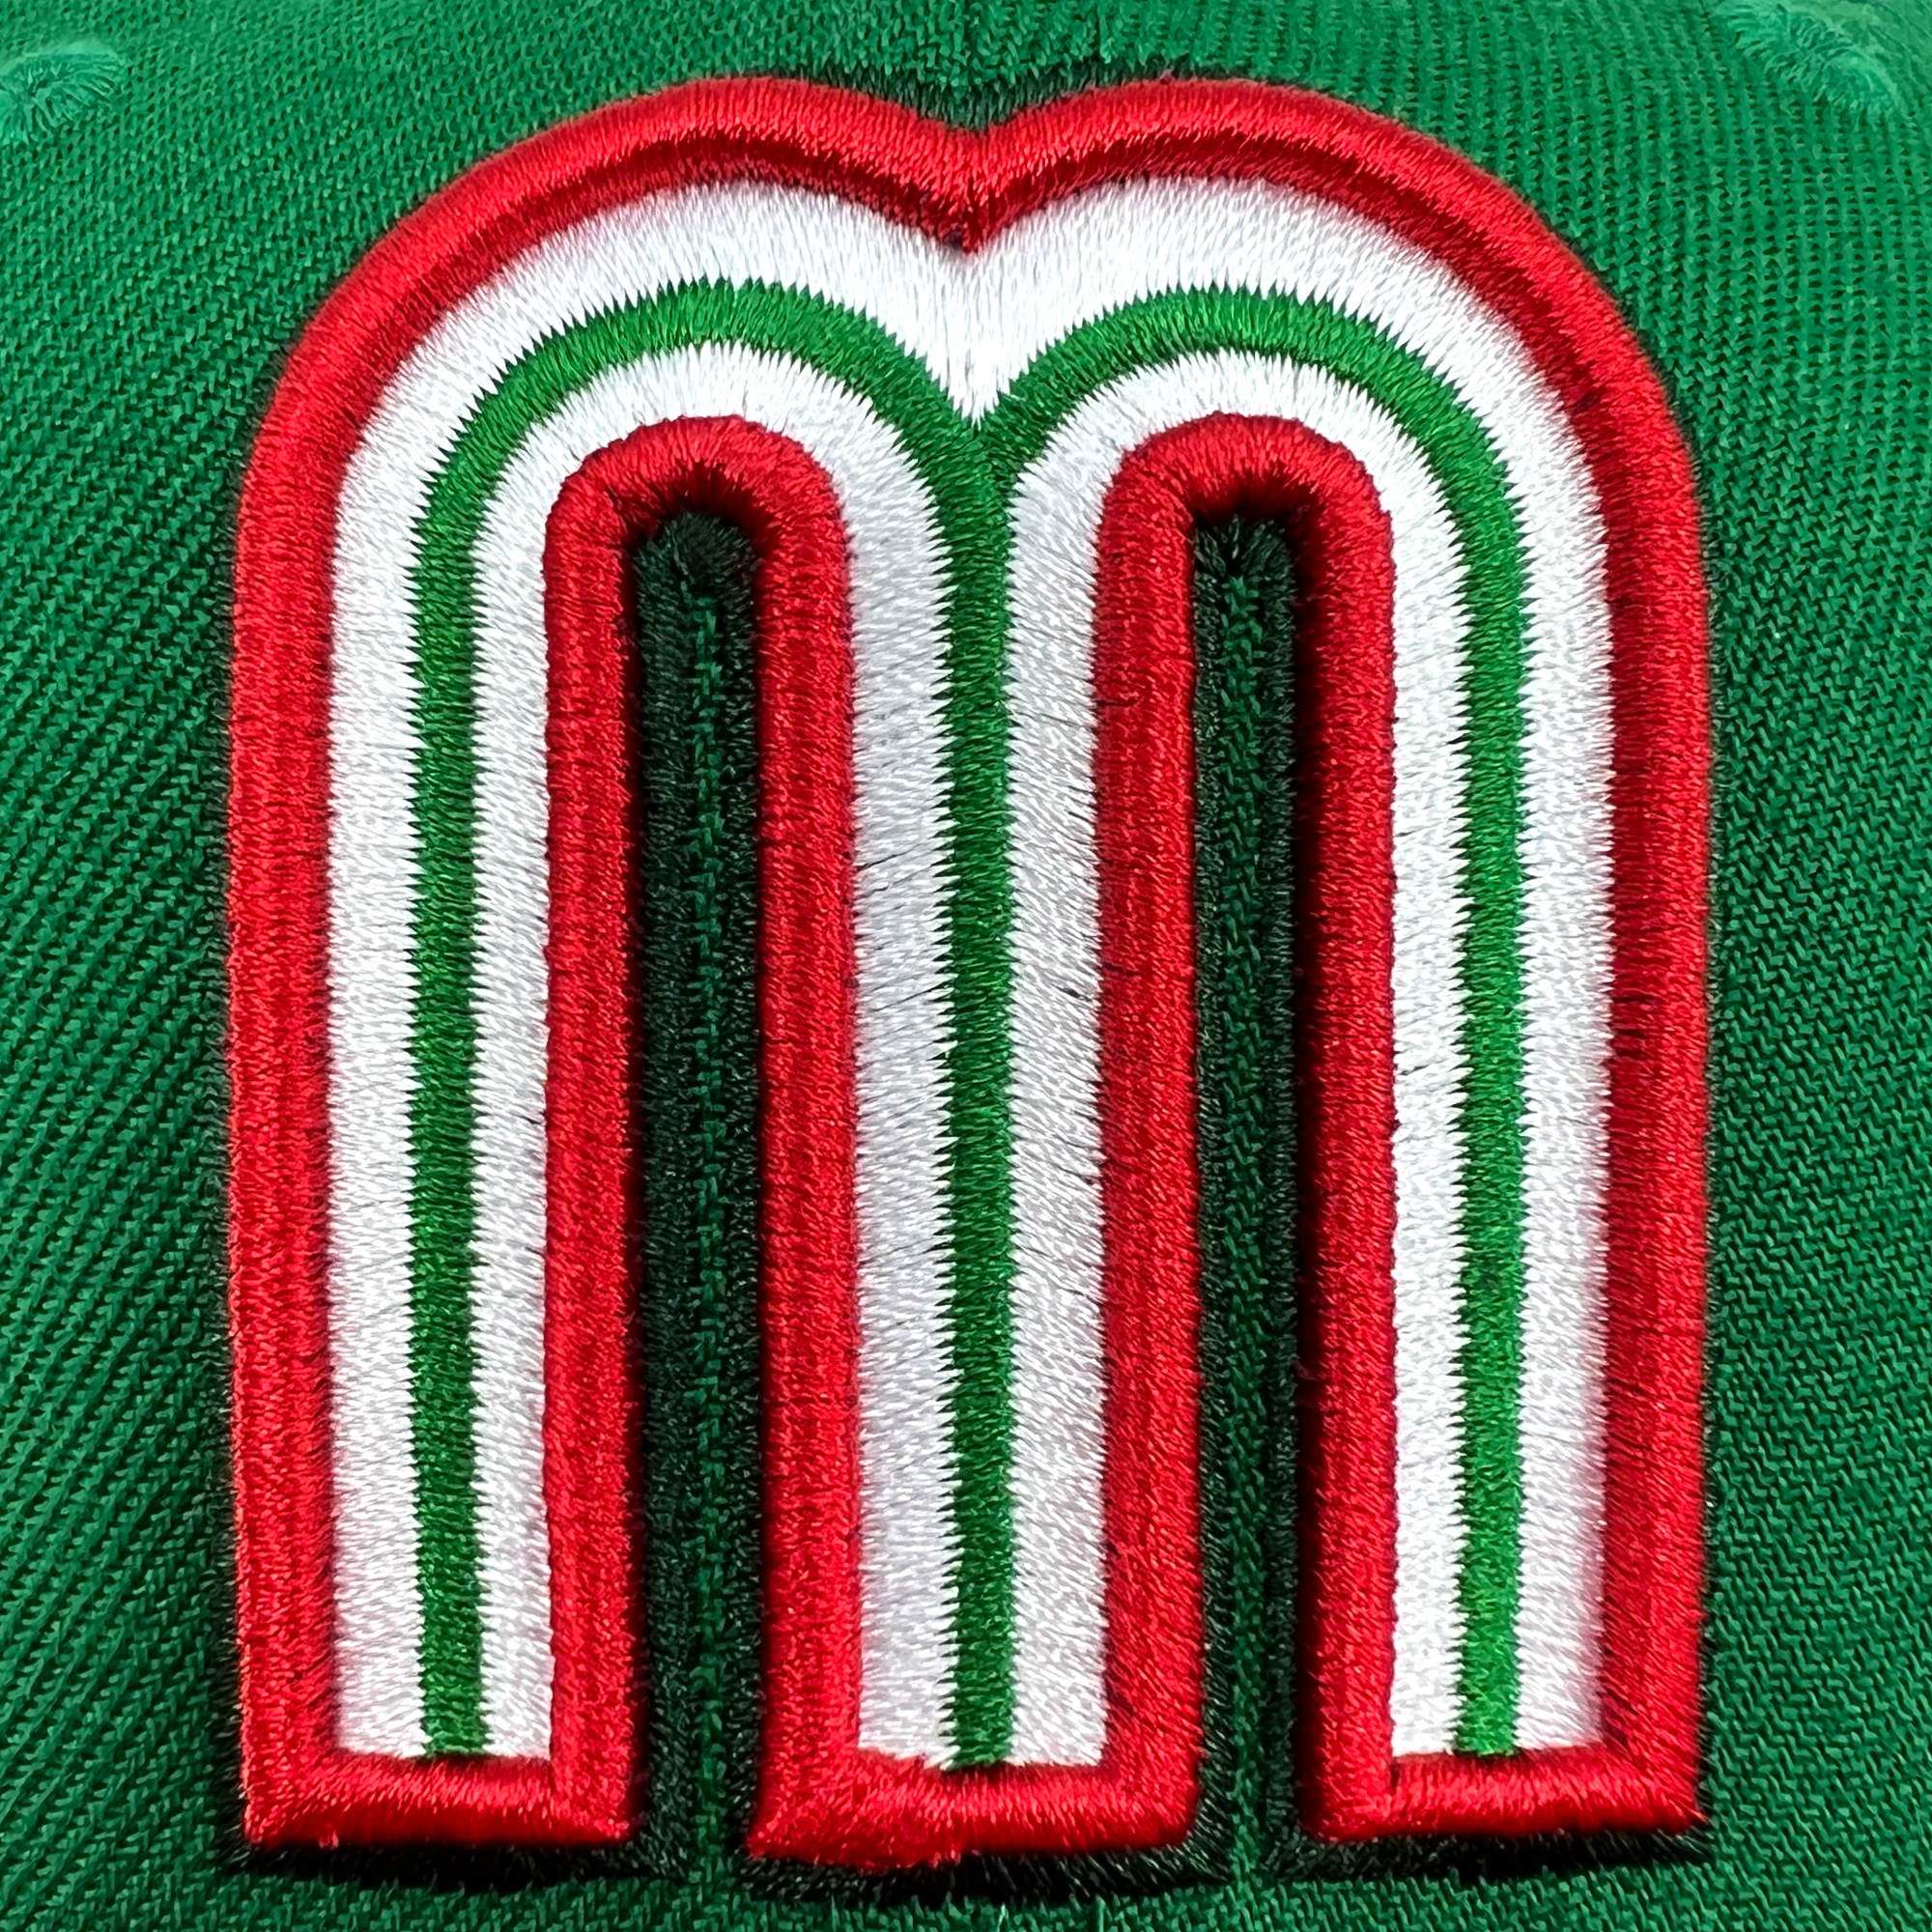 Detailed close-up of red and white Mexican baseball M patch on the crown of New Era cap.